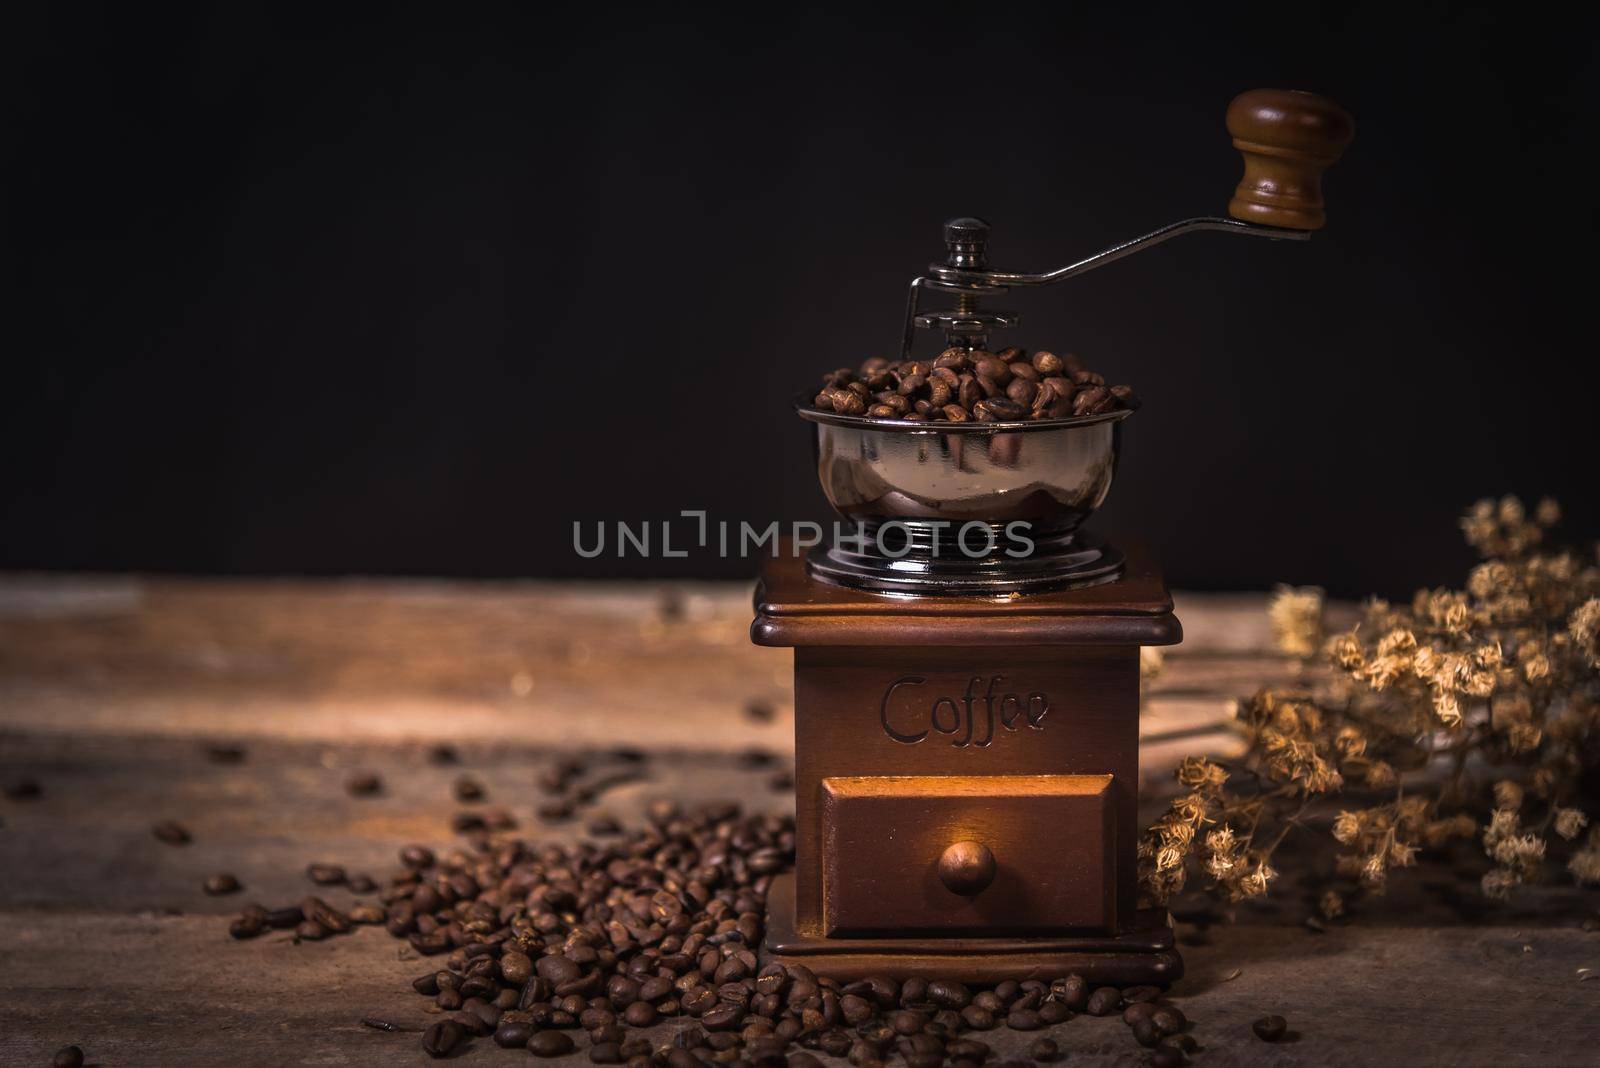 Coffee grinder and coffee beans